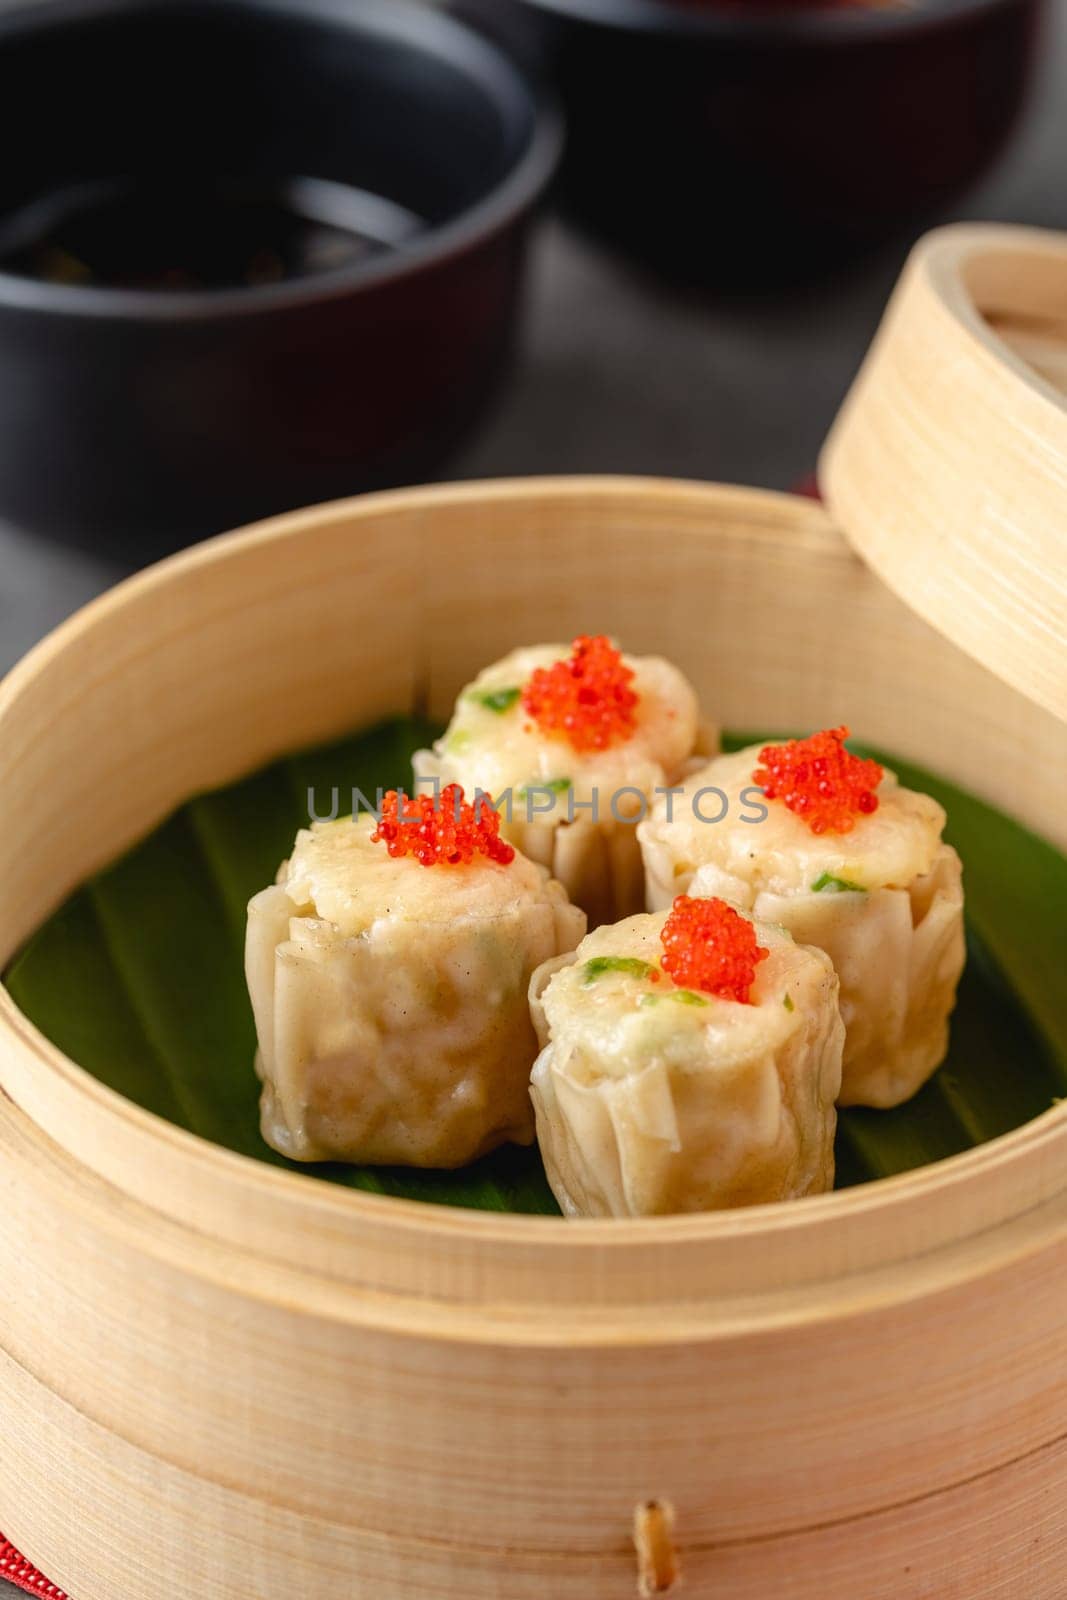 Shumai with shrimp and mushrooms, a traditional Chinese dumpling often served with dim sum